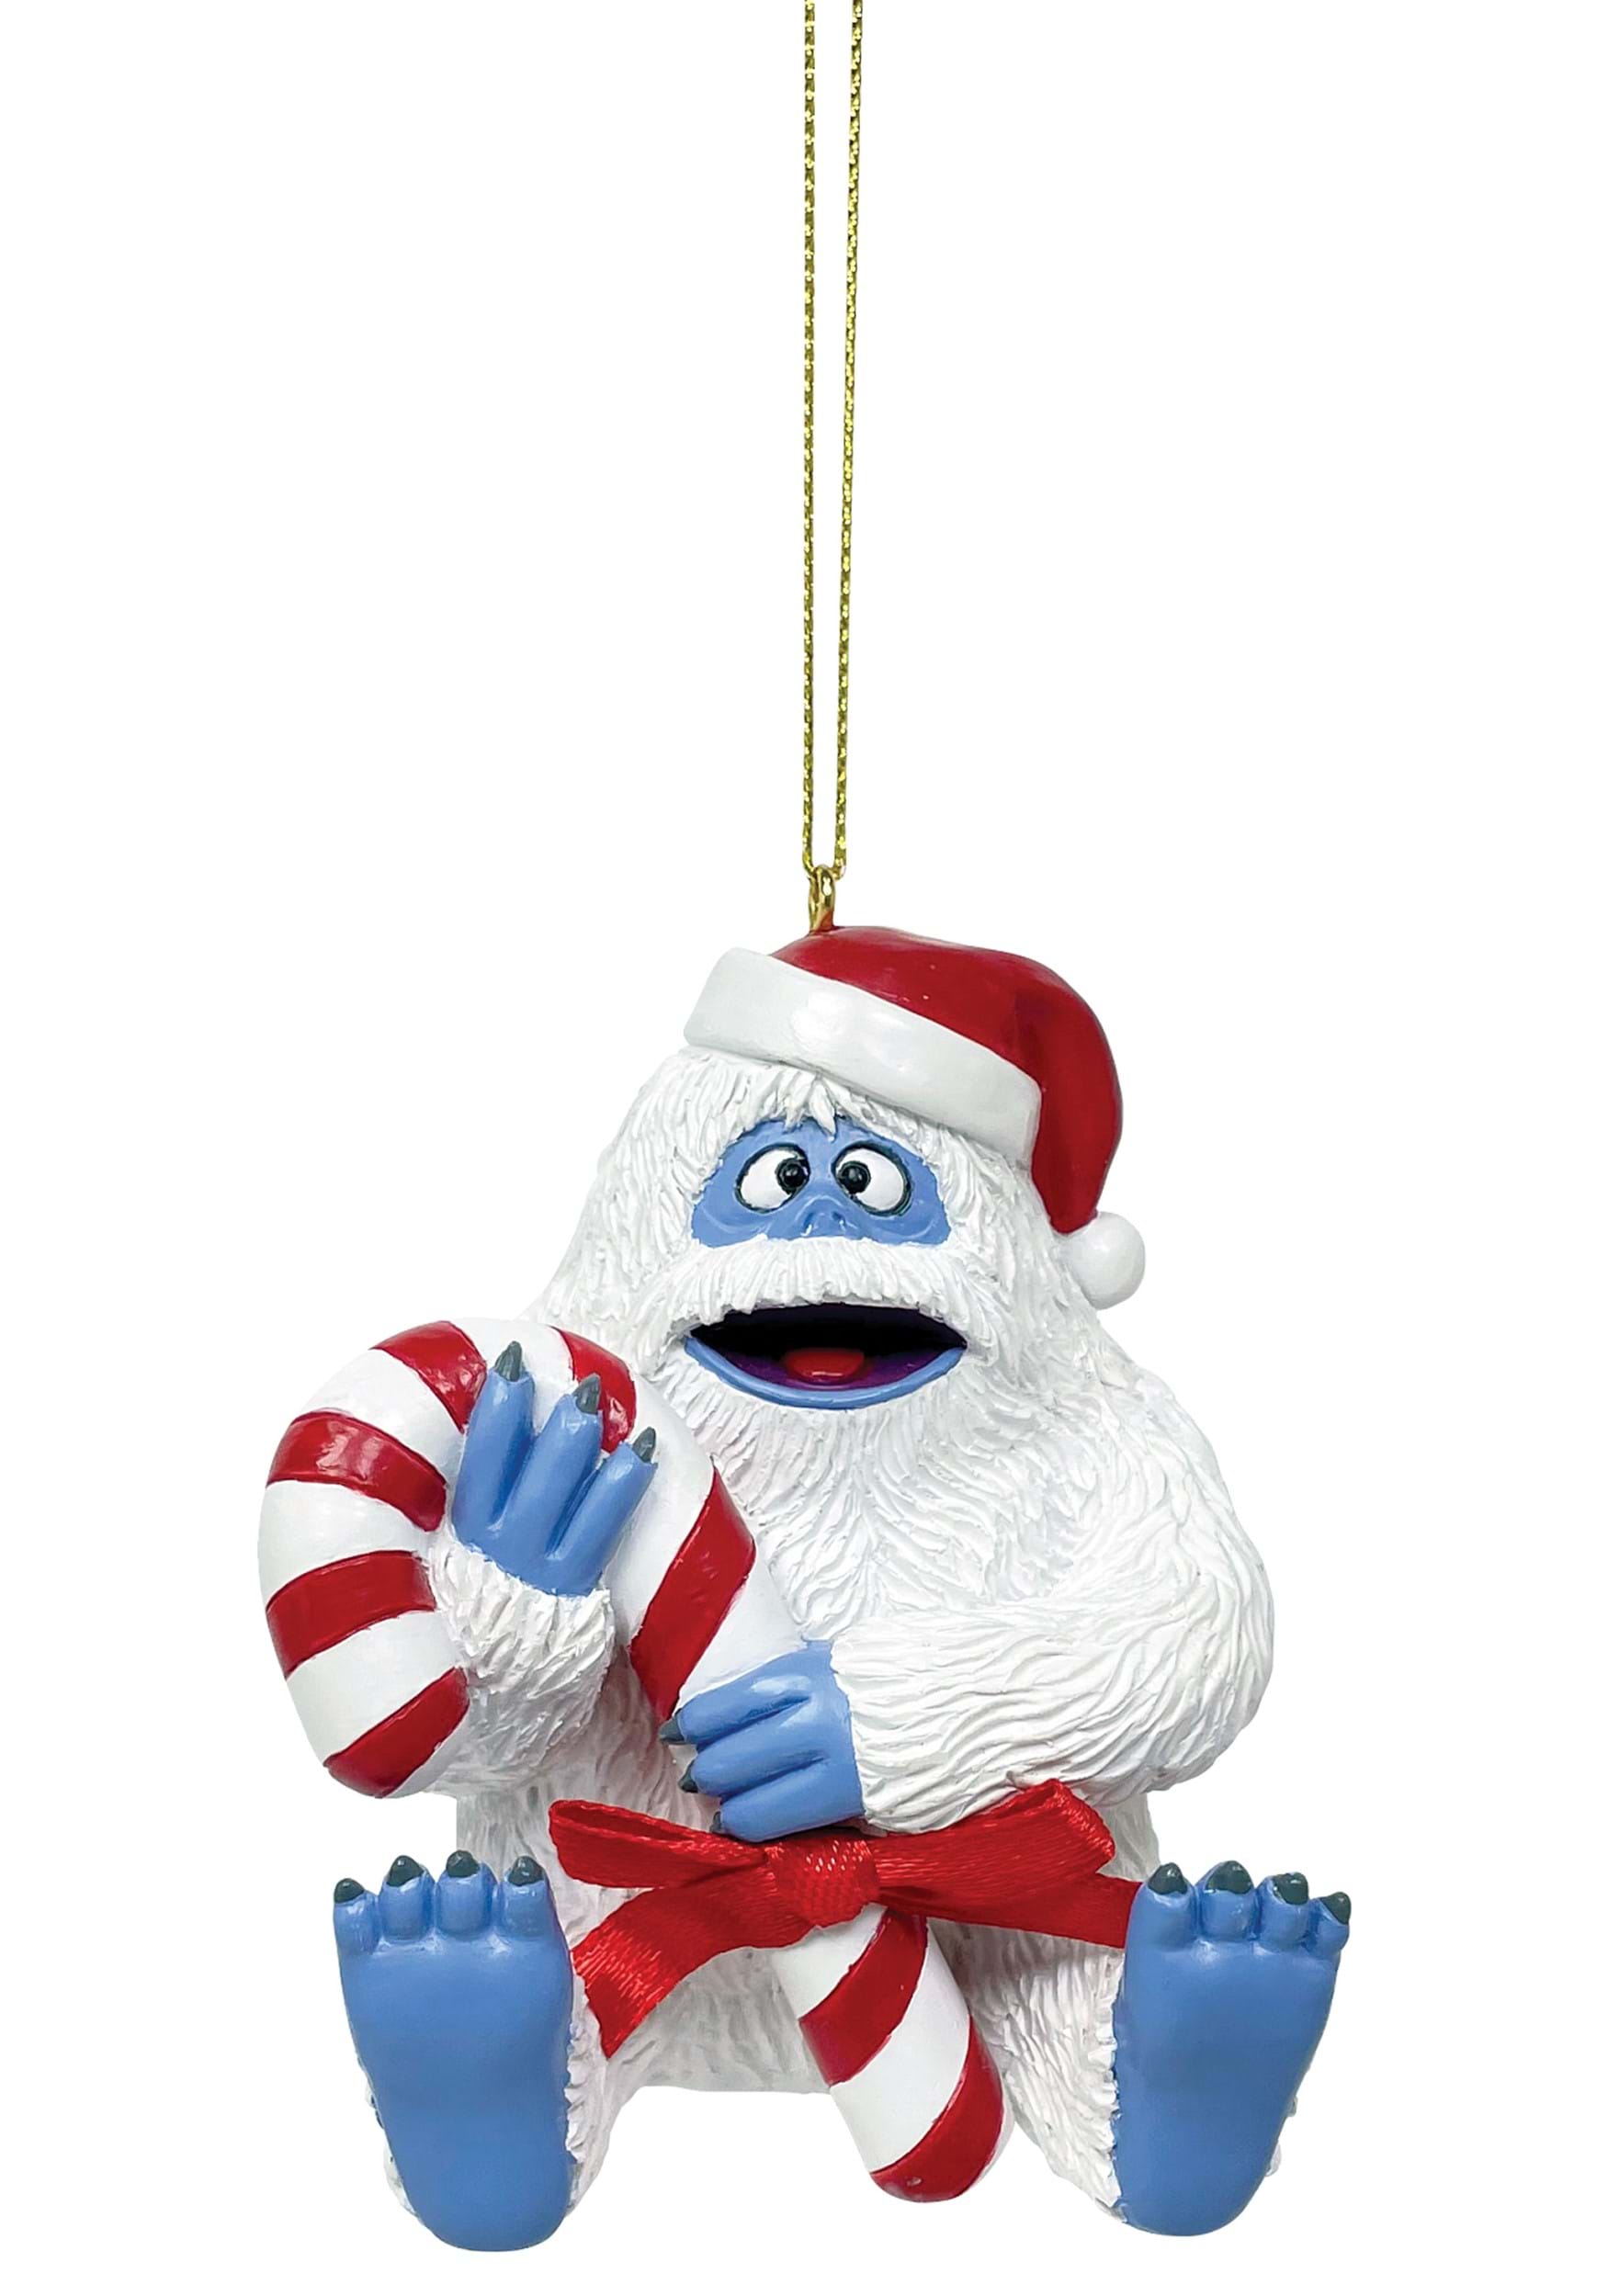 Bumble with Candy Cane Ornament